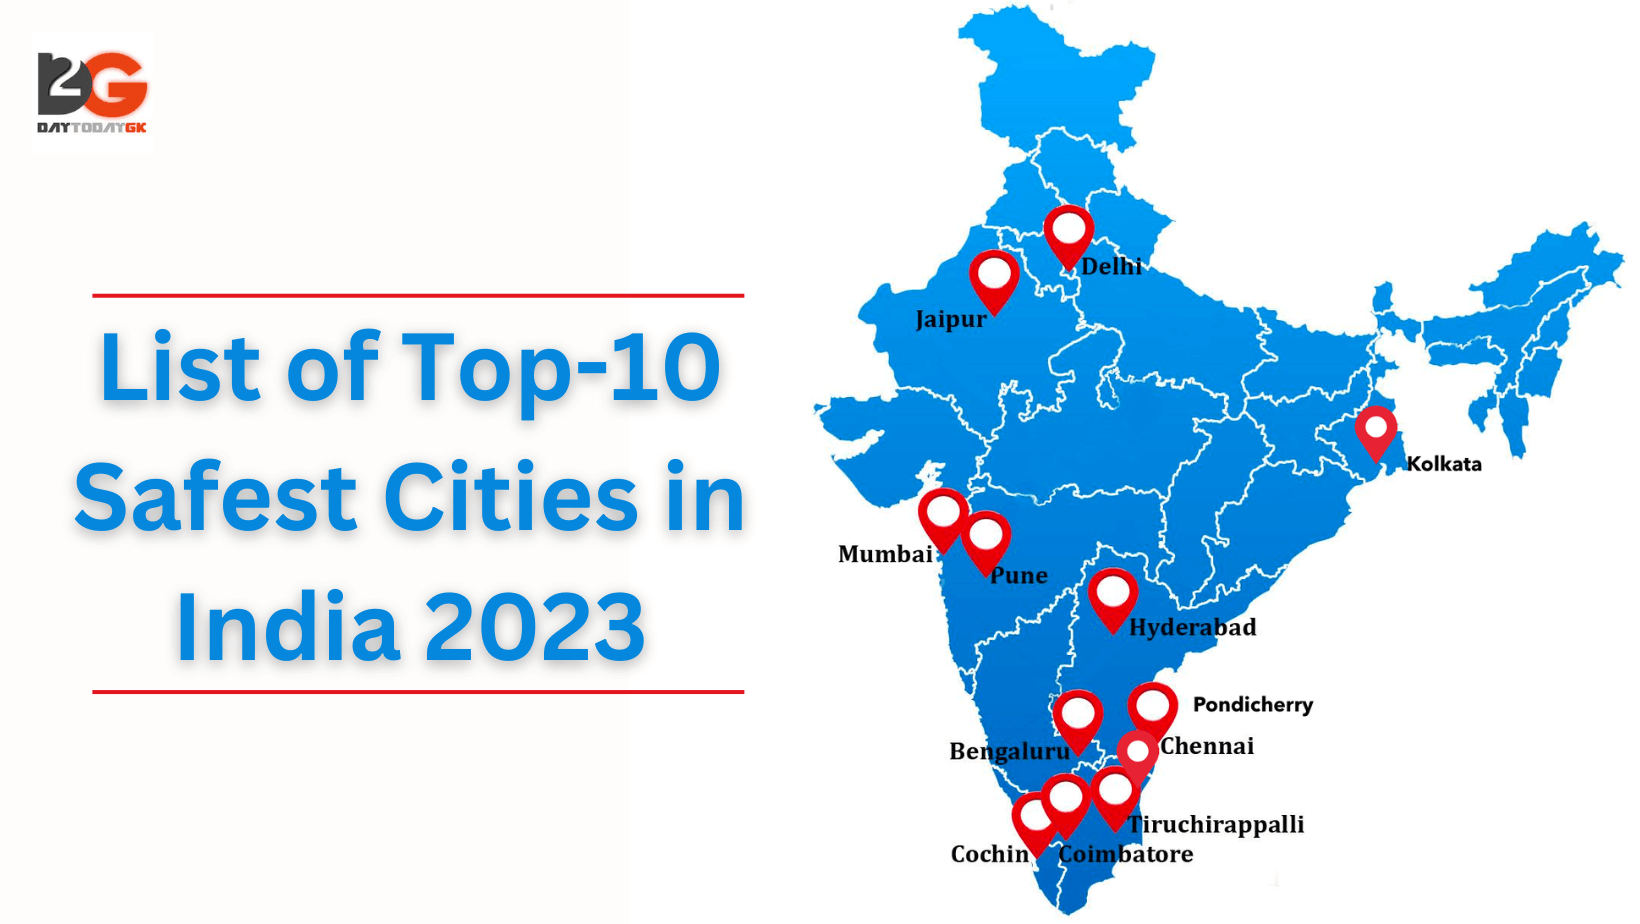 List of Top-10 Safest Cities in India 2023